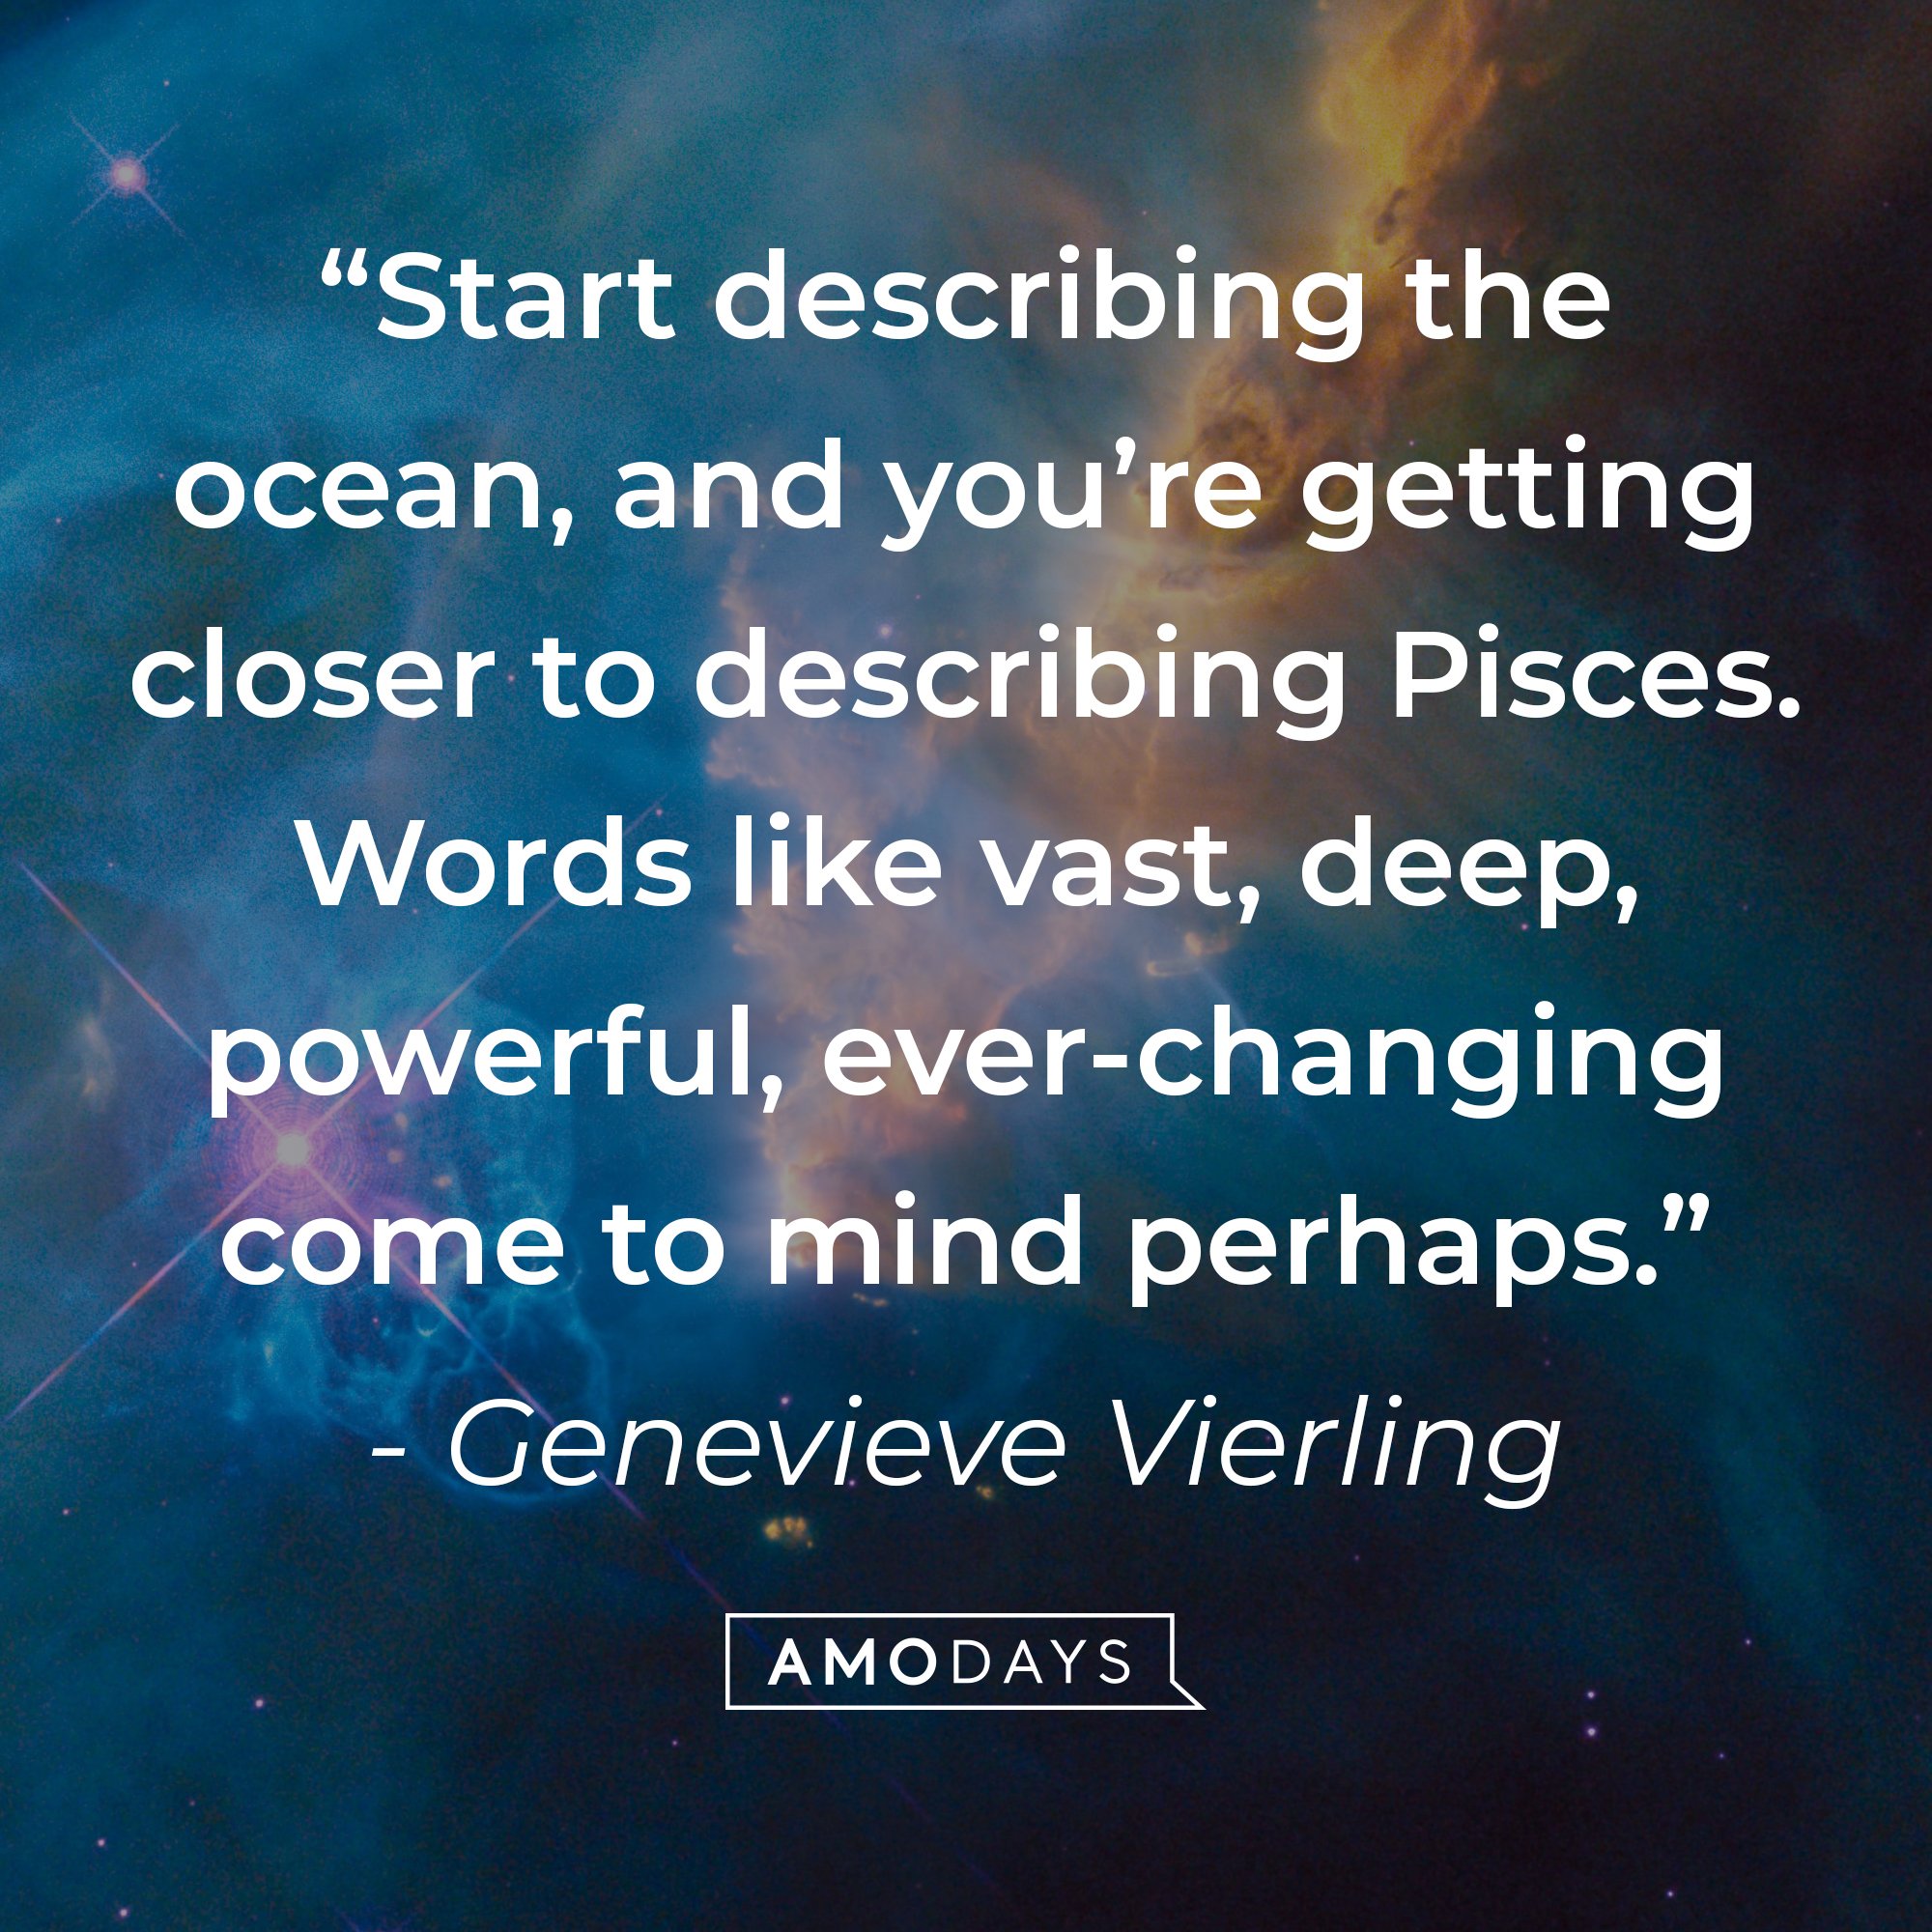 Genevieve A. Vierling's quote: "Start describing the ocean, and you're getting closer to describing Pisces. Words like vast, deep, powerful, ever-changing come to mind perhaps." | Image: AmoDays